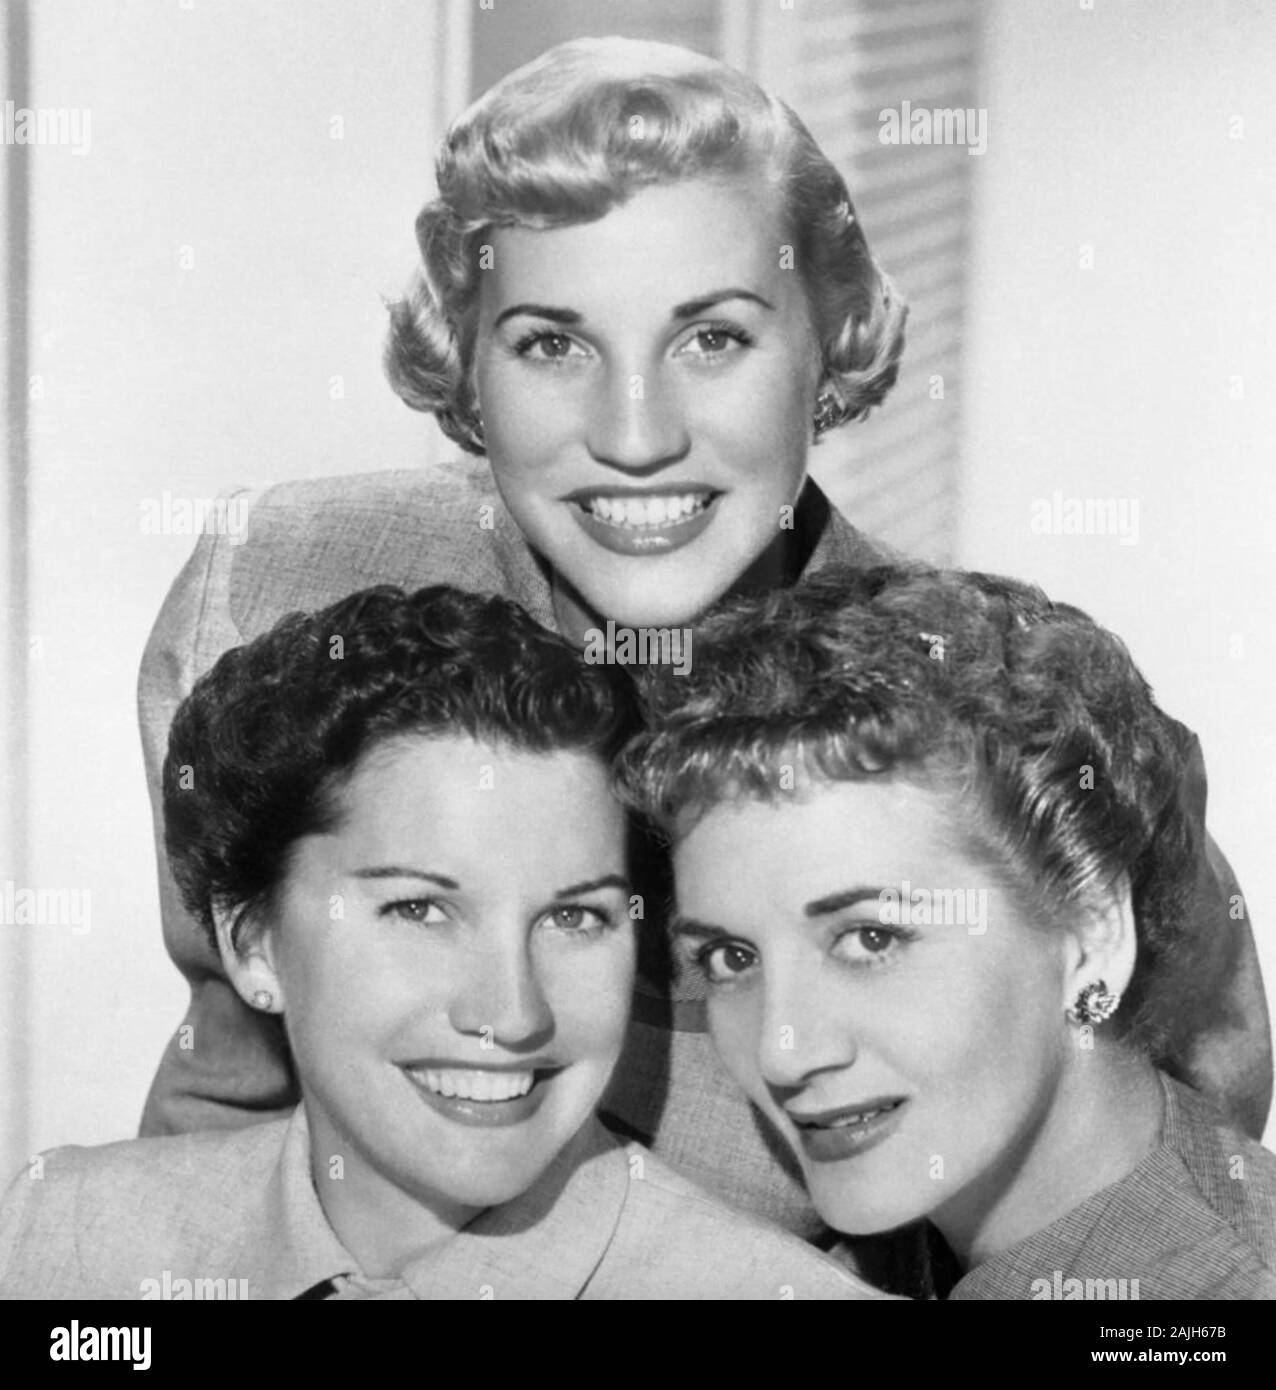 ANDREWS SISTERS Promotional photo of American vocal group about 1952. From left: Maxene, Patty, LaVerne. Stock Photo